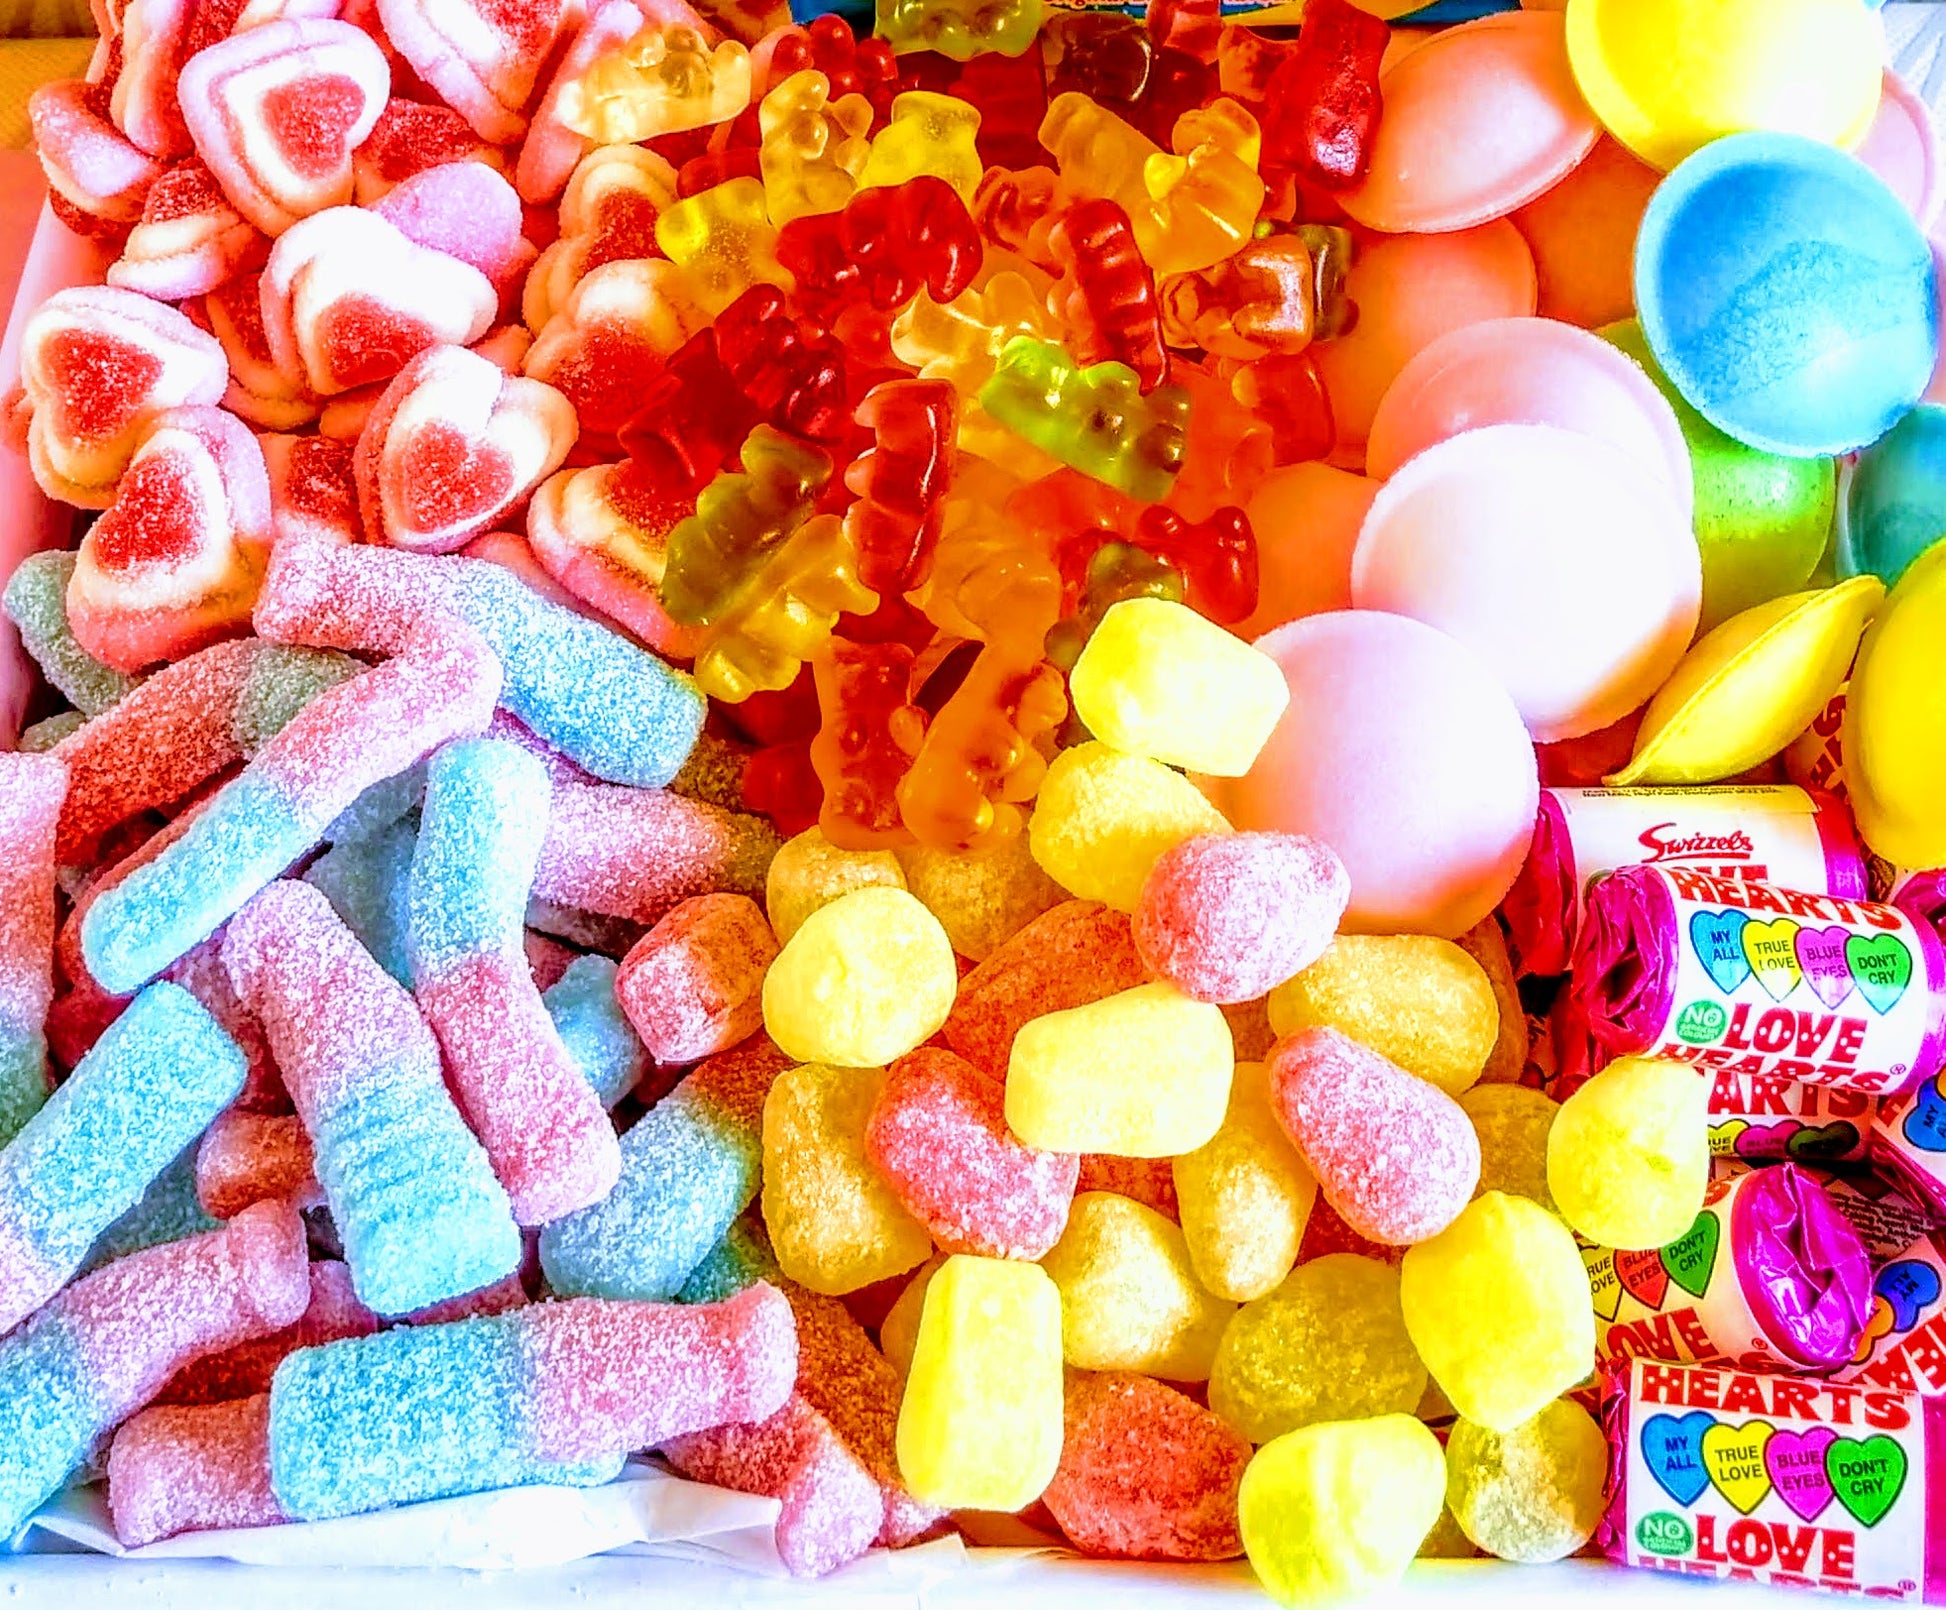 Best Mix sweets in UK